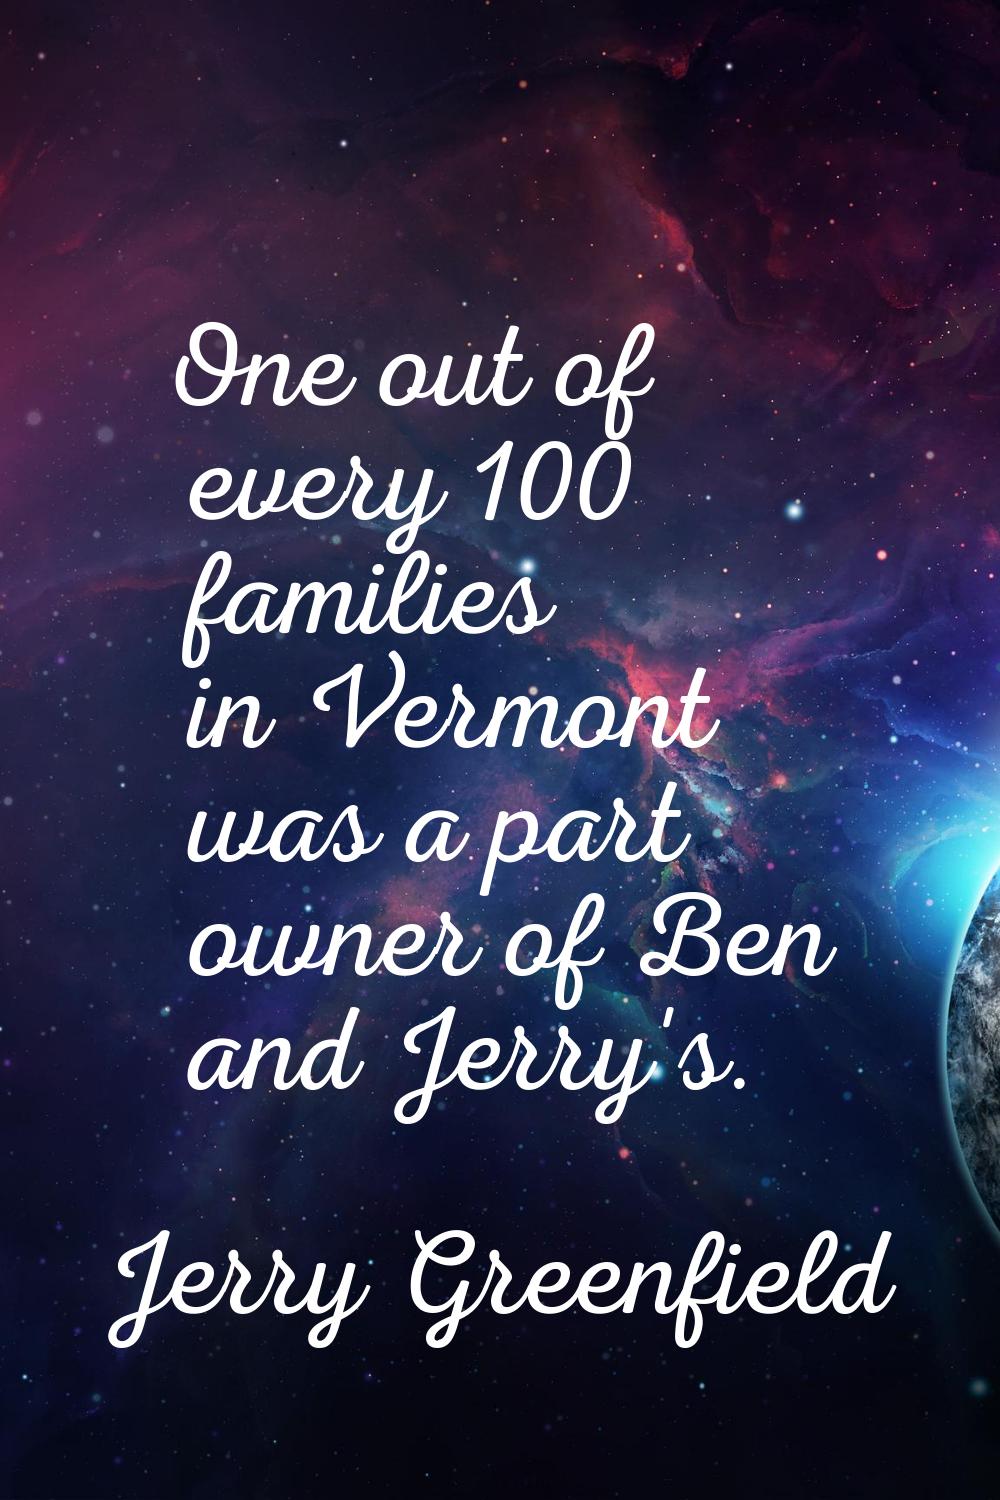 One out of every 100 families in Vermont was a part owner of Ben and Jerry's.